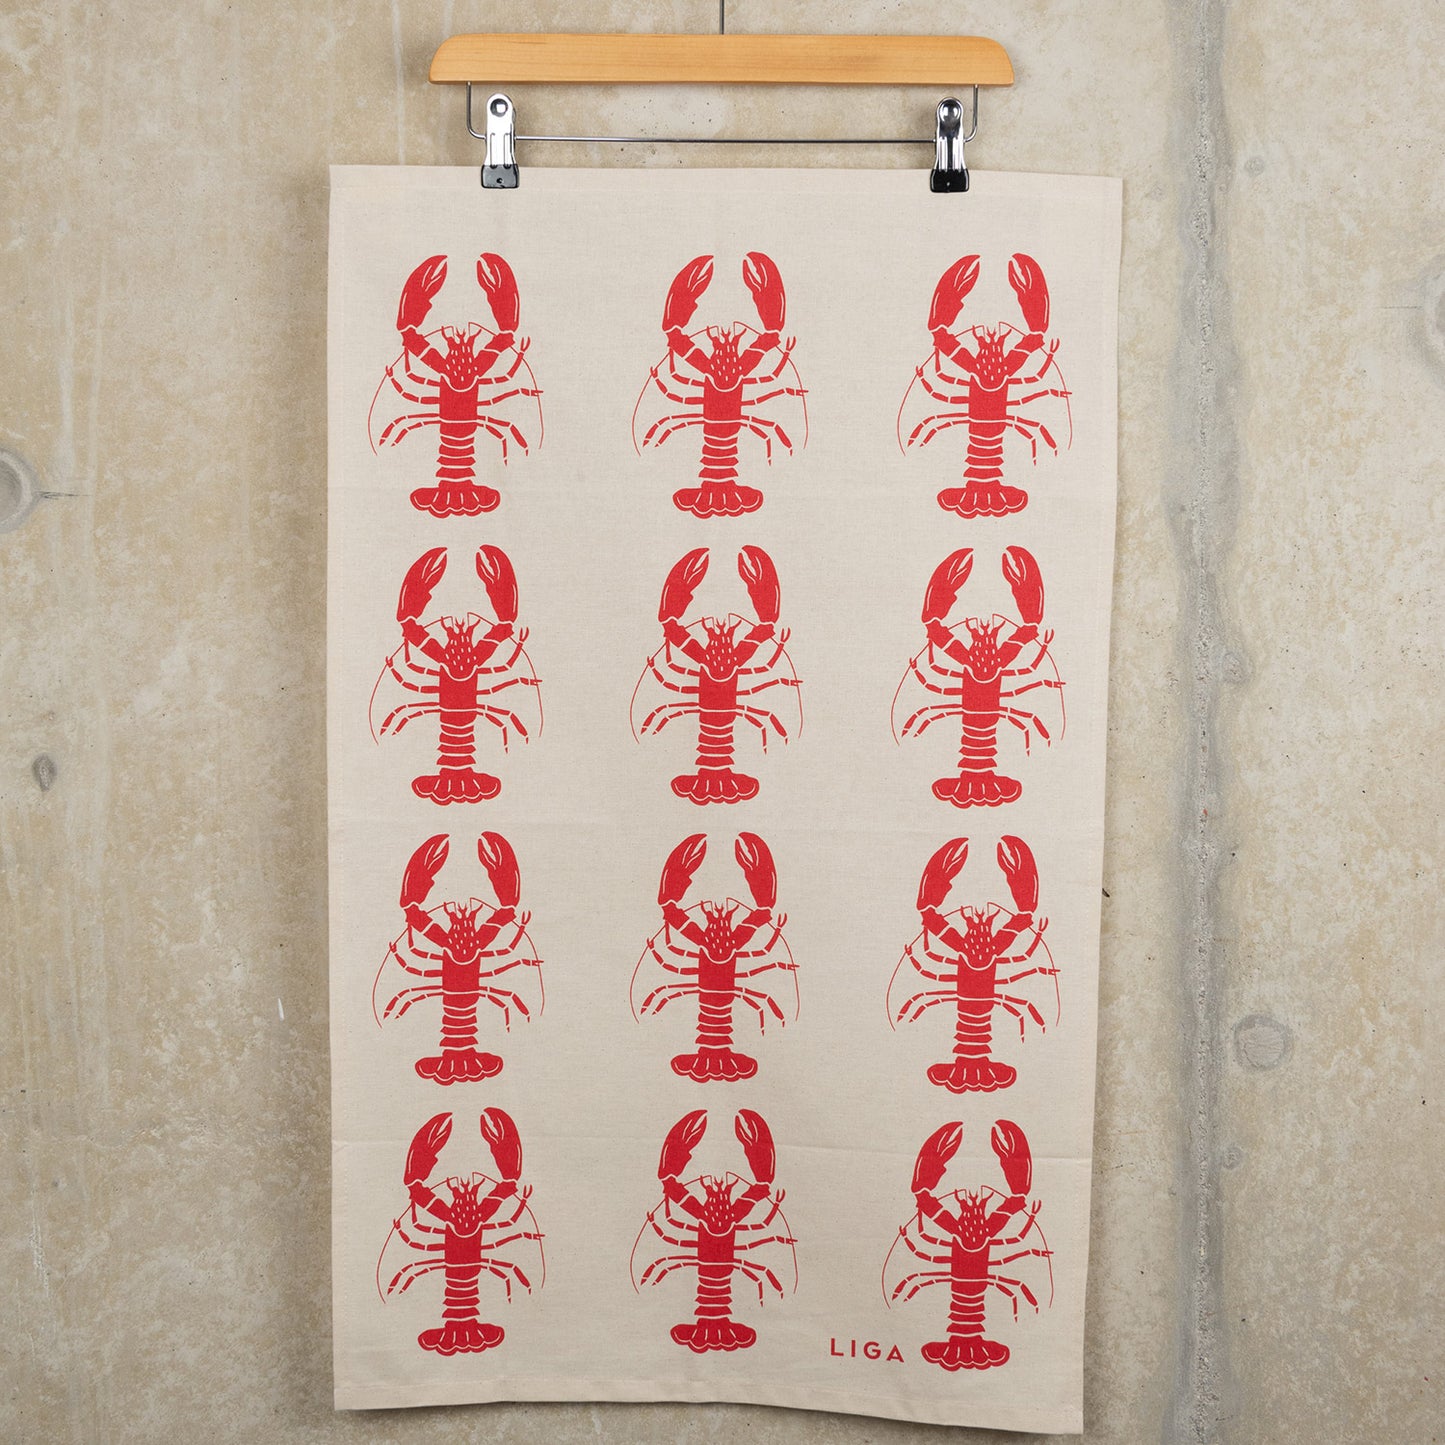 Red lobster repeating pattern on a cream coloured back ground. The Red Lobster Tea Towel is hanging from a clip hanger on a grey background.